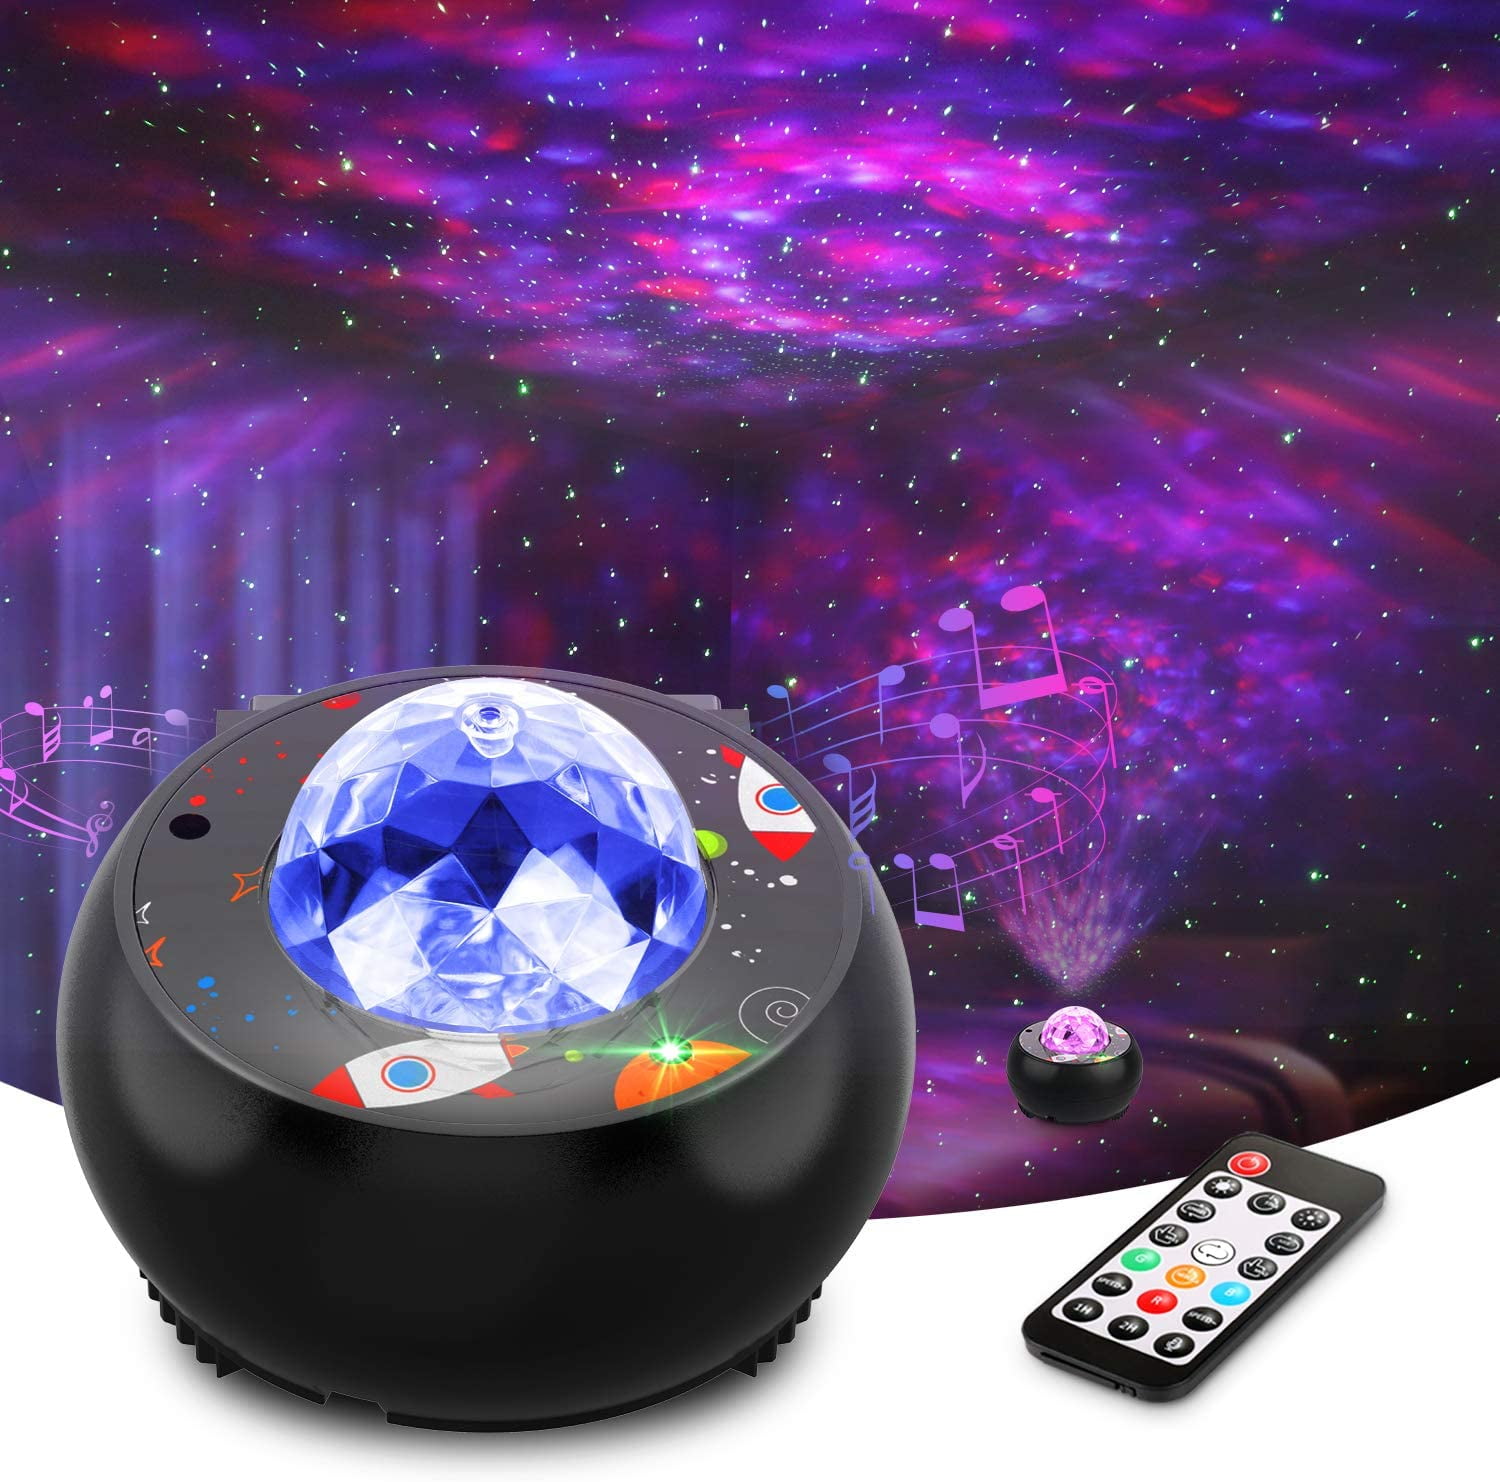 Disco Lights for Party LED Projection Lamp Stage Light Starry Projector Ocean Wave Projector Night Light Effects with Remote Control Bluetooth Speaker Mood Lighting for Kids Festival Birthday 